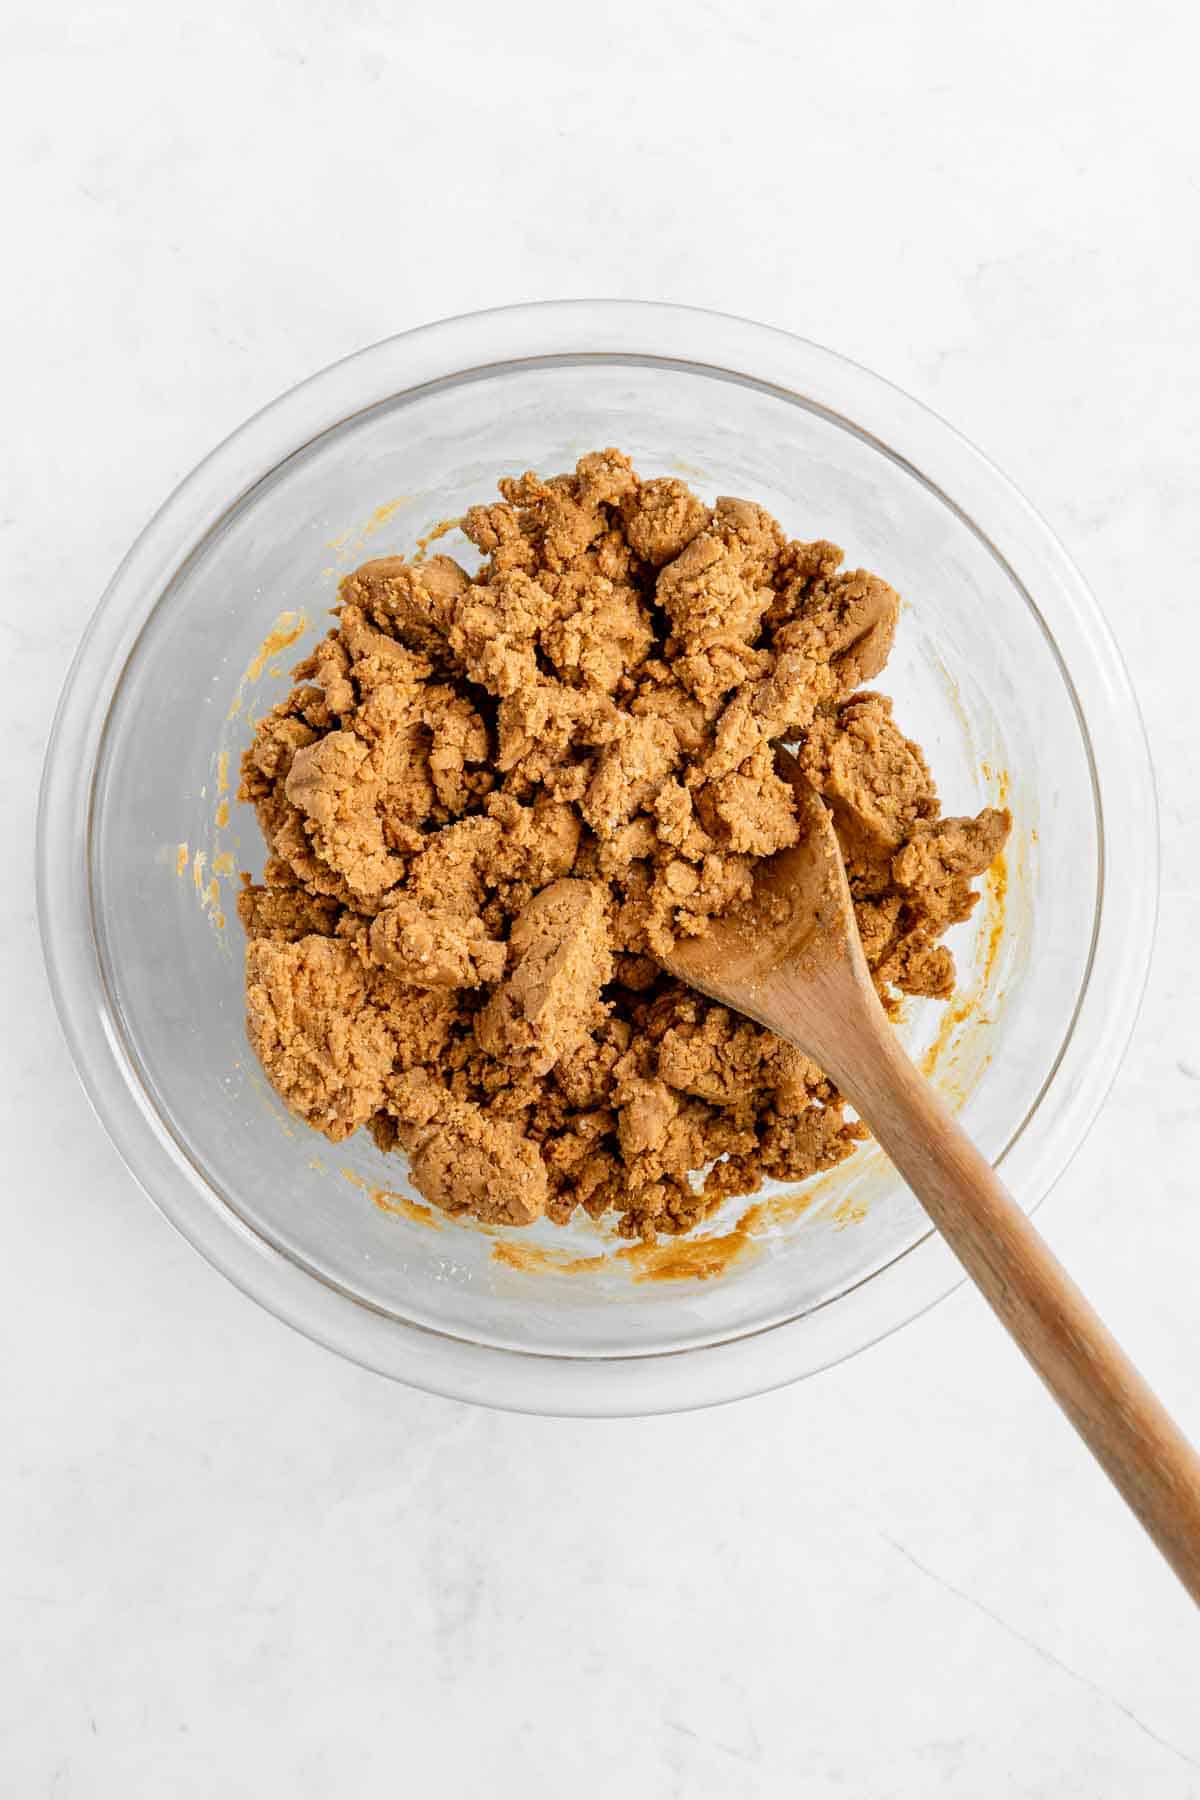 mixing peanut butter protein bar dough in a glass bowl